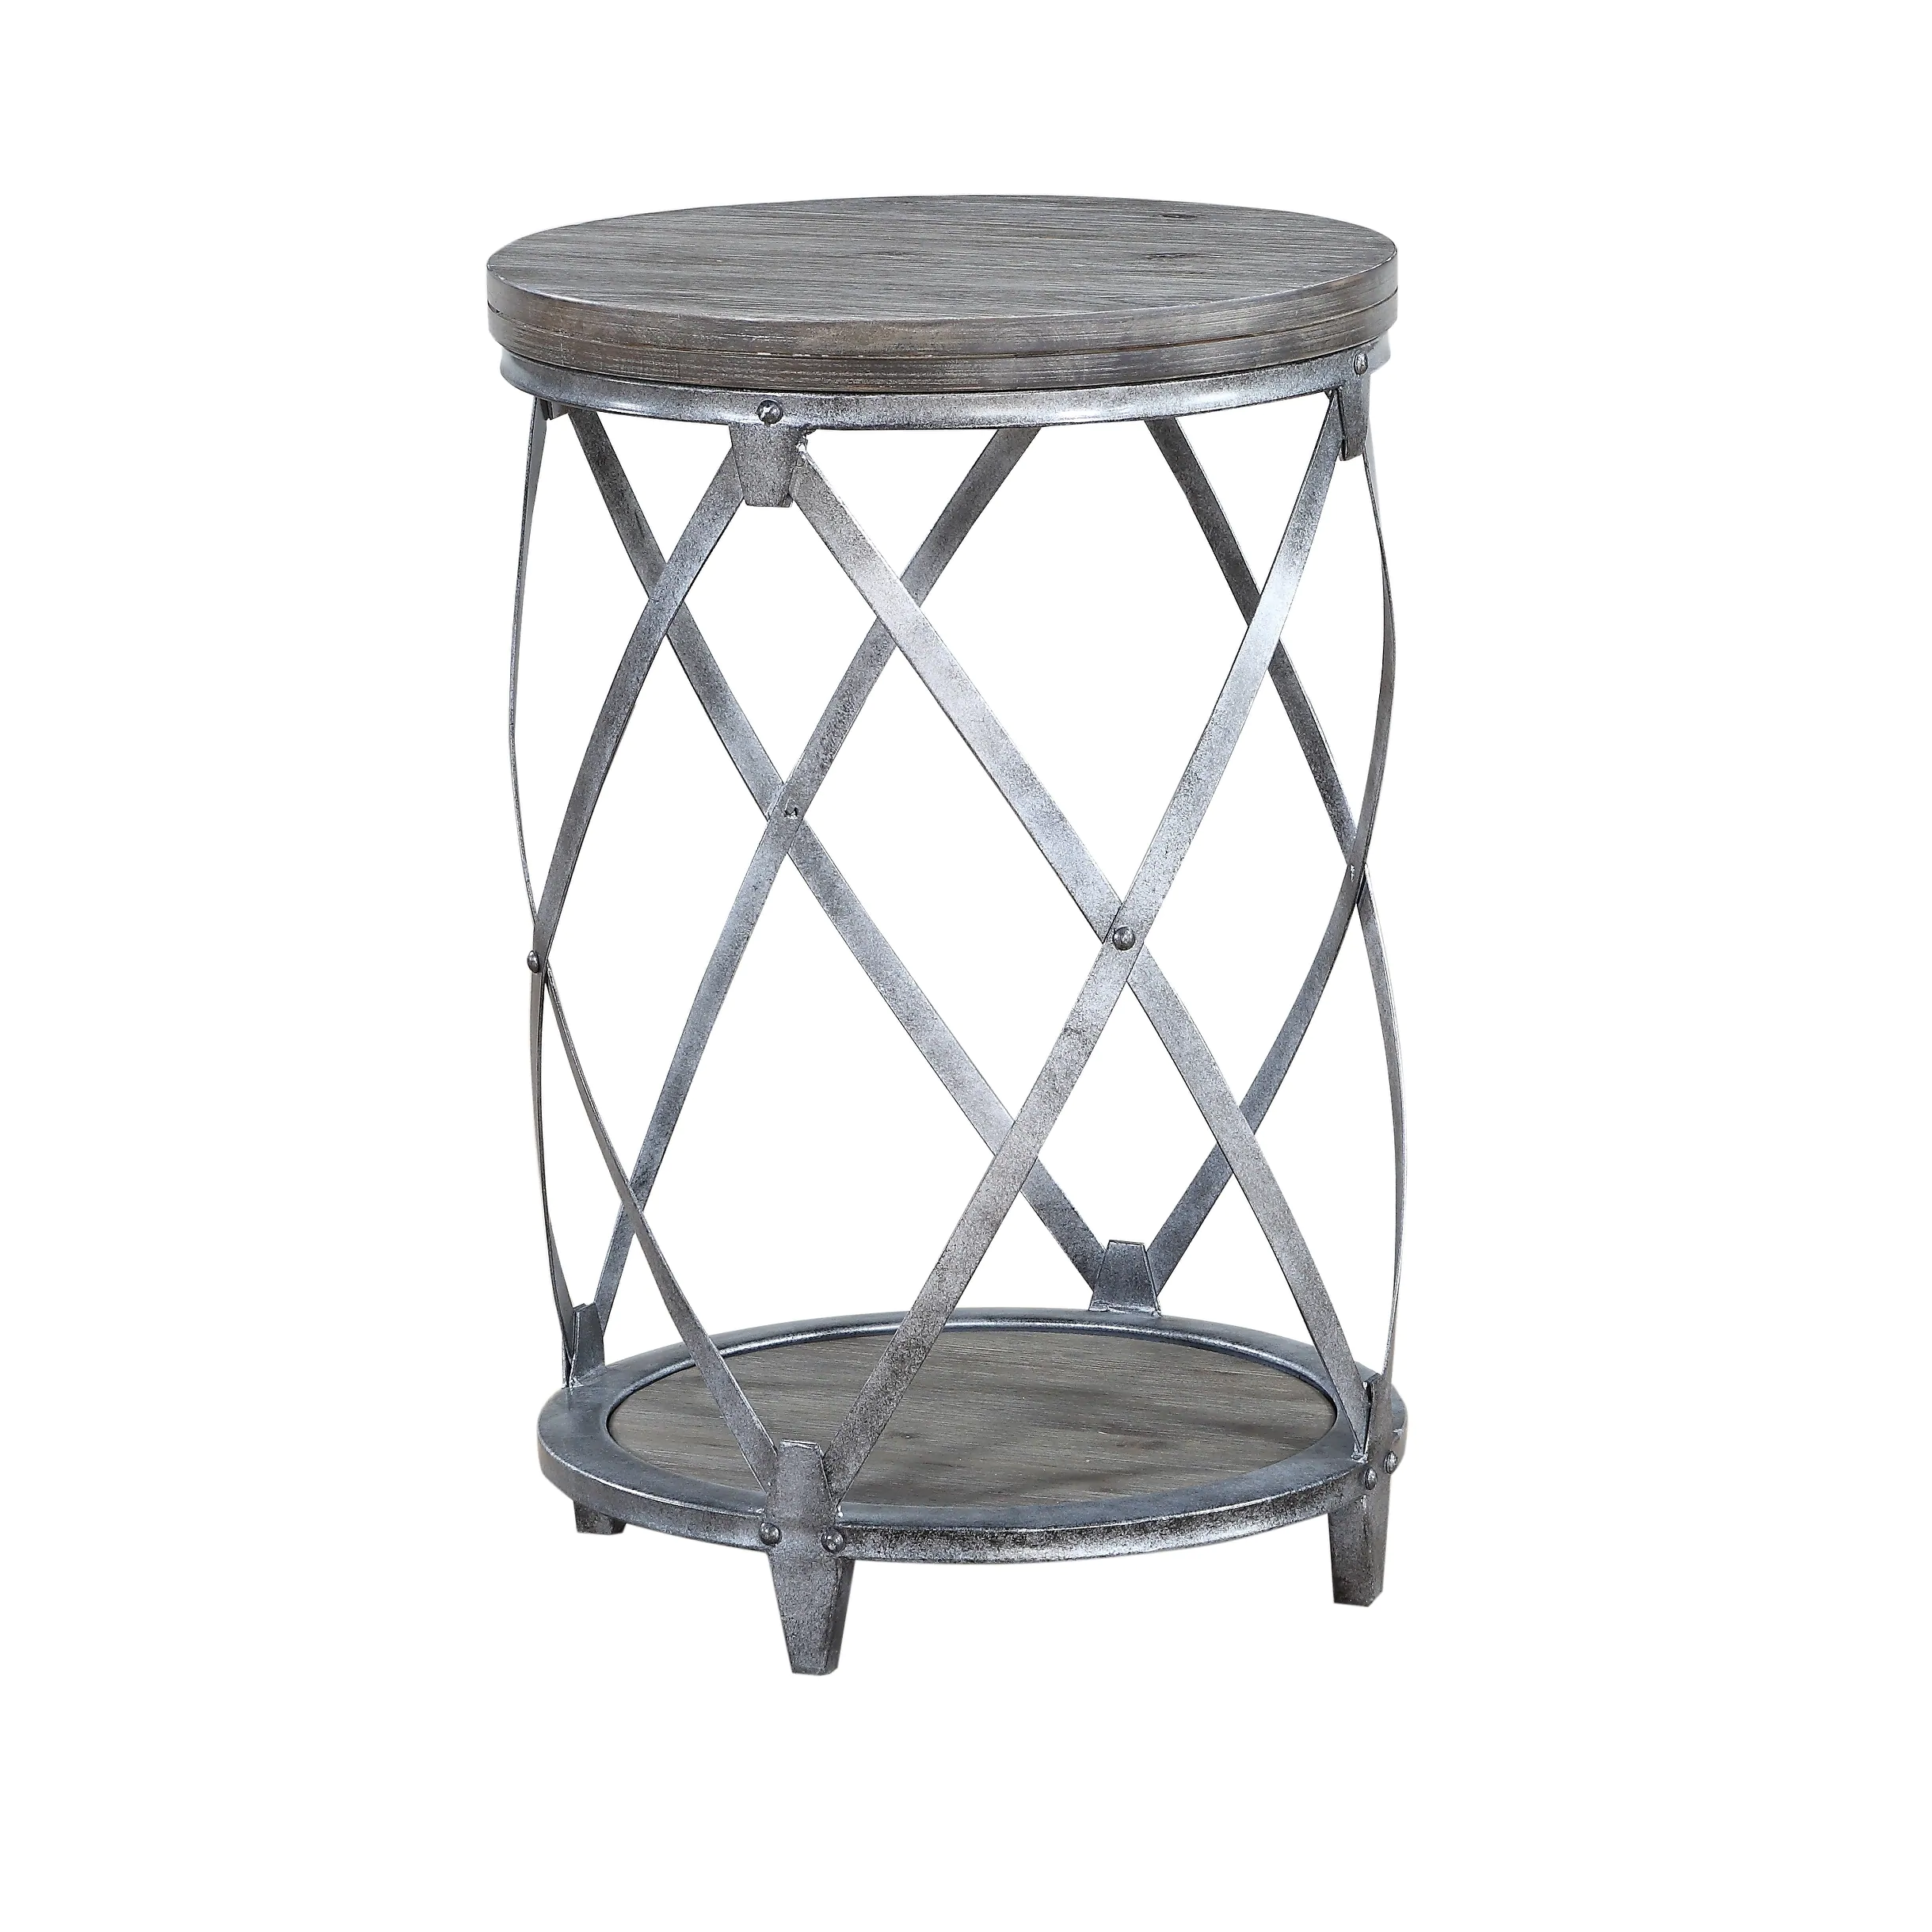 waverly round accent table free shipping today vanora small balcony furniture sets style end tables patio chair metal drum hand painted new coffee dressers mid century modern rugs